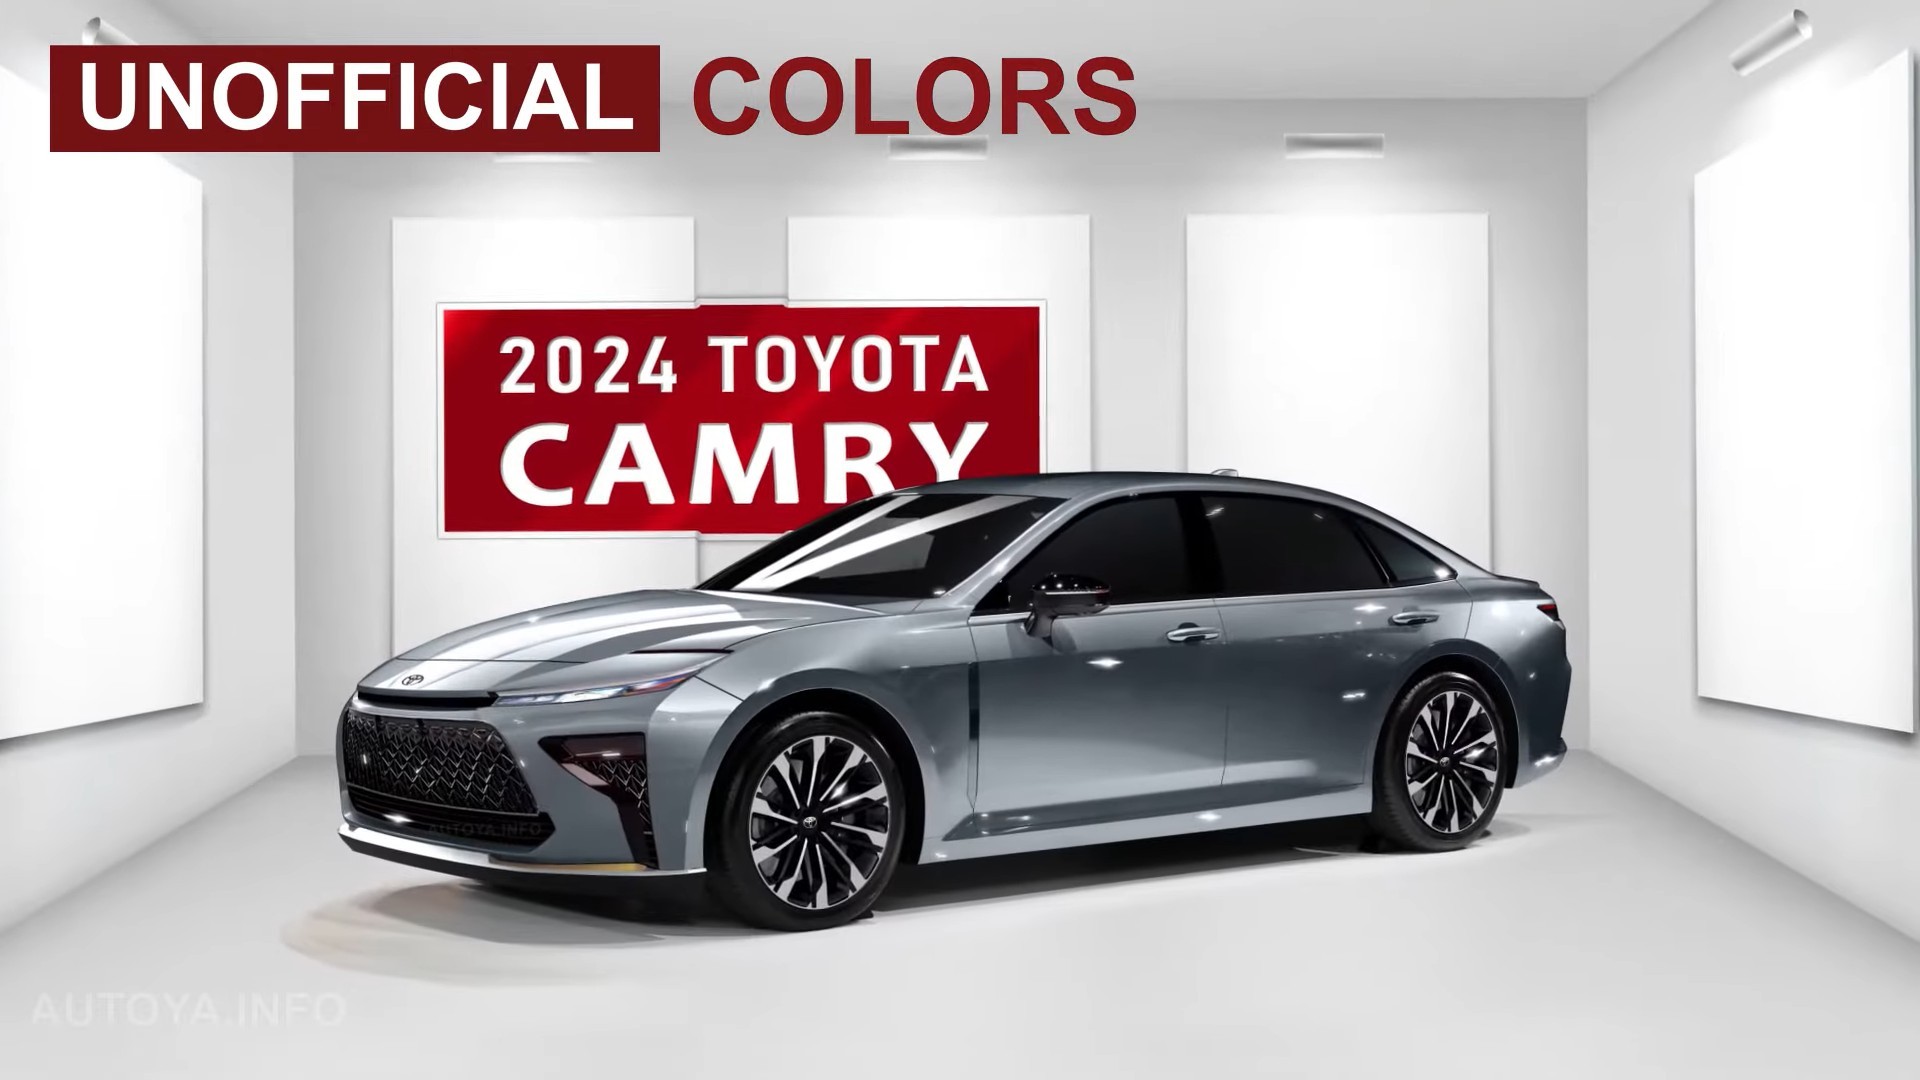 Colors Available On A 2024 Toyota Camry